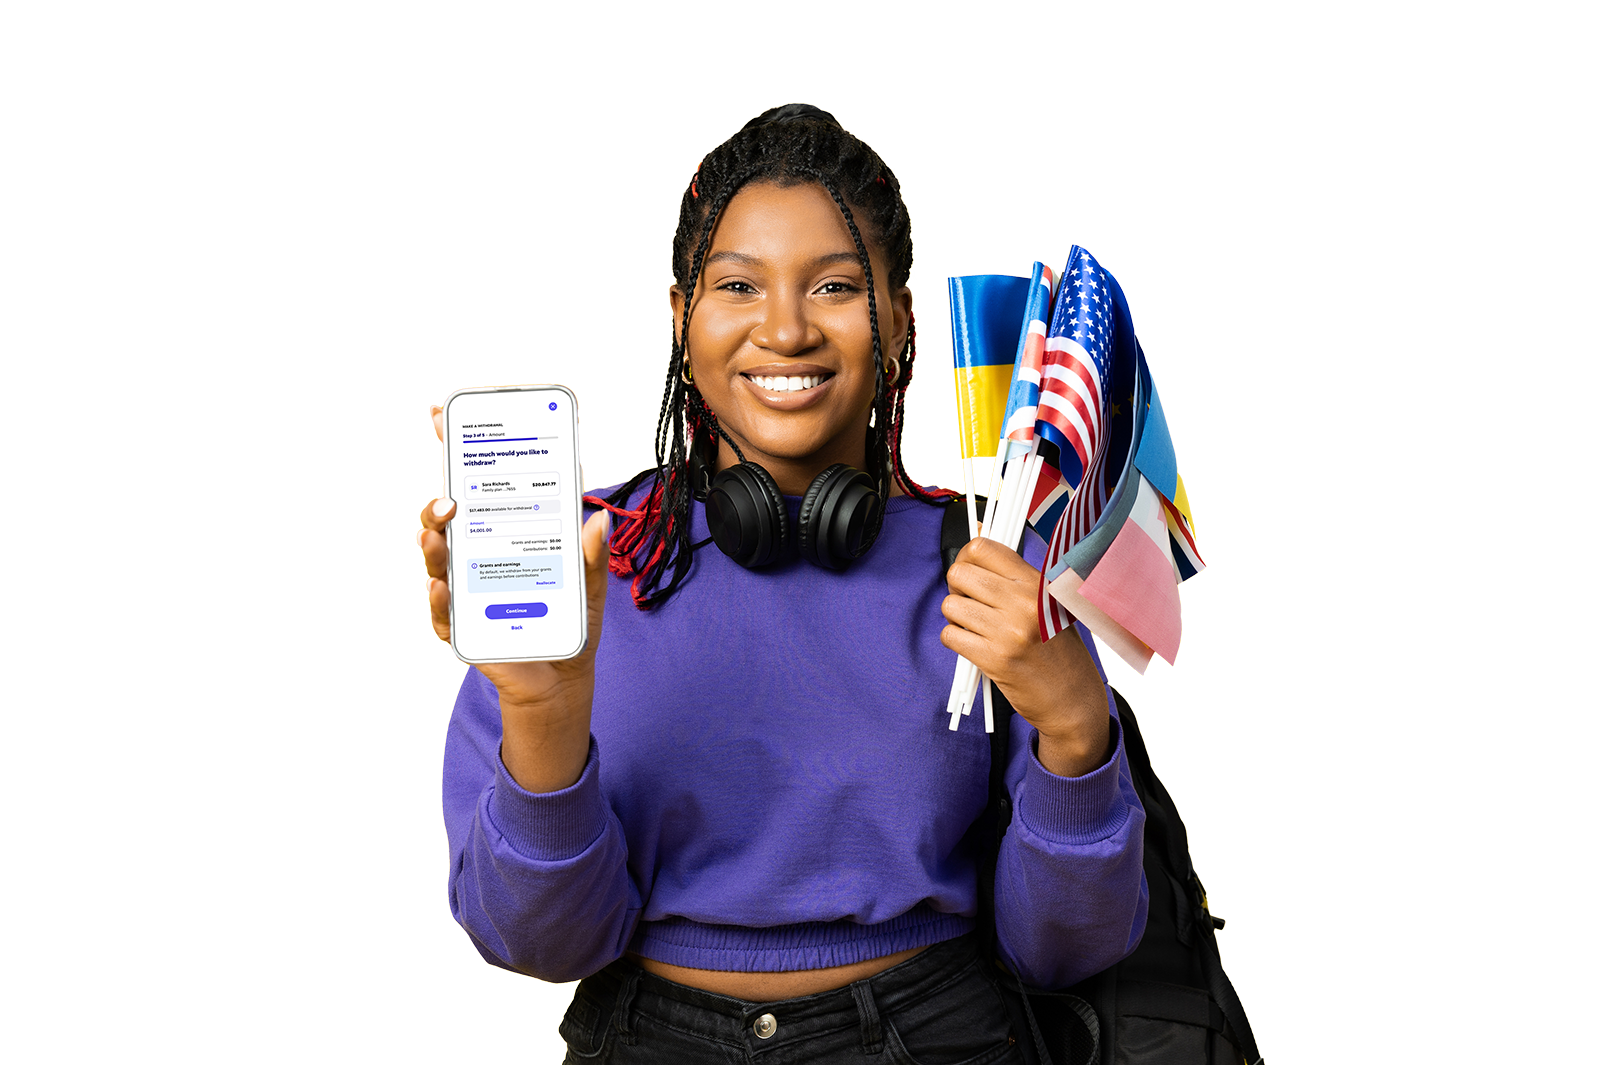 girl holding phone and flags smiling. Phone displays money in RESP